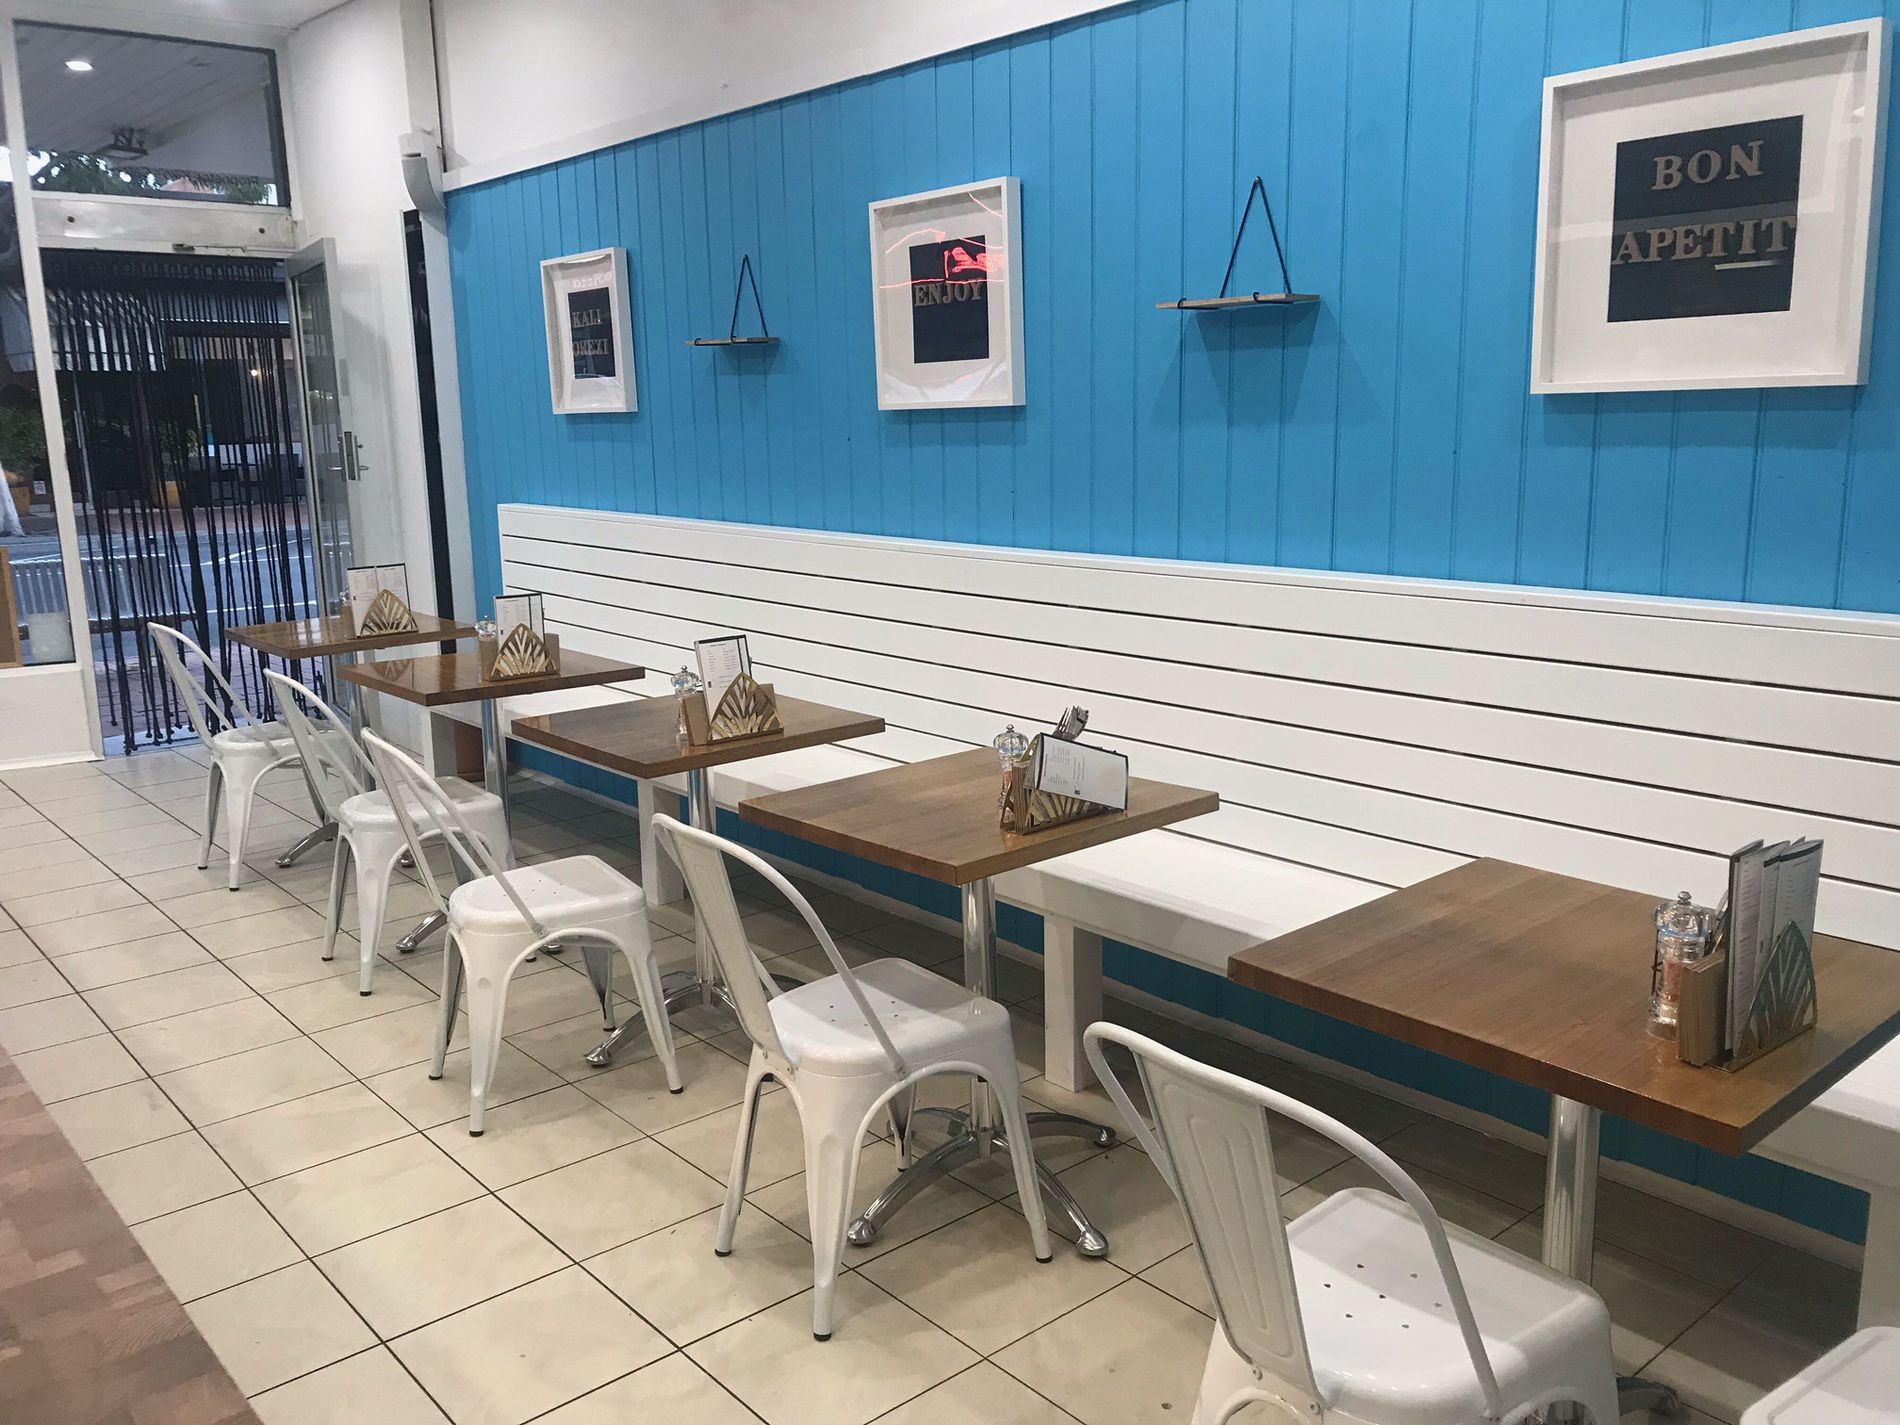 Fish and Chips Takeaway Business For Sale Bayside